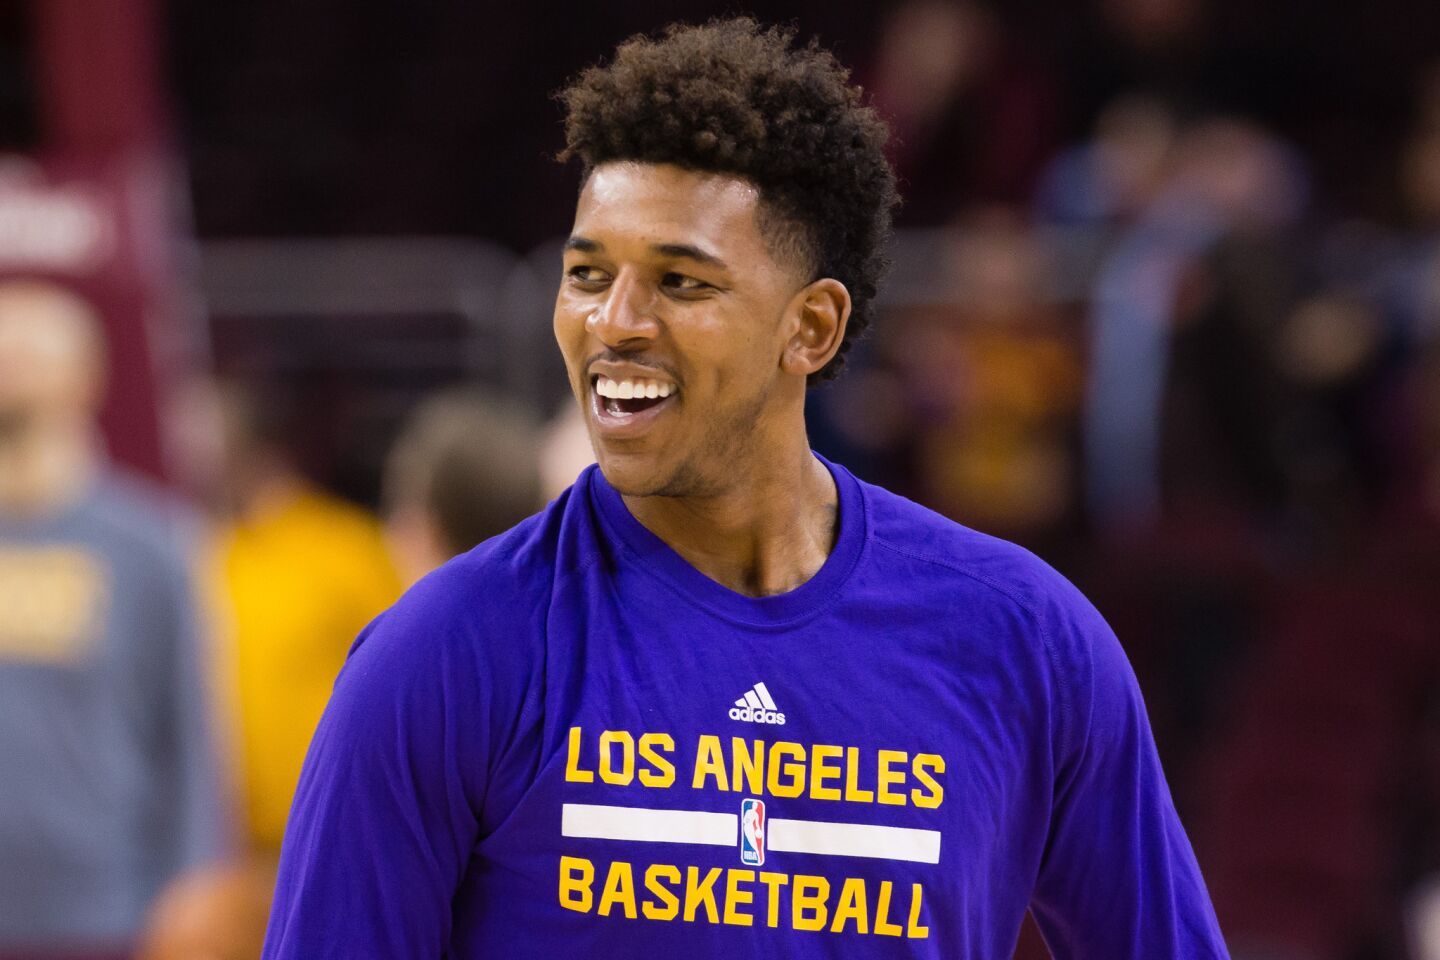 Lakers guard Nick Young warms up before a game against the Cleveland Cavaliers on Feb. 10.